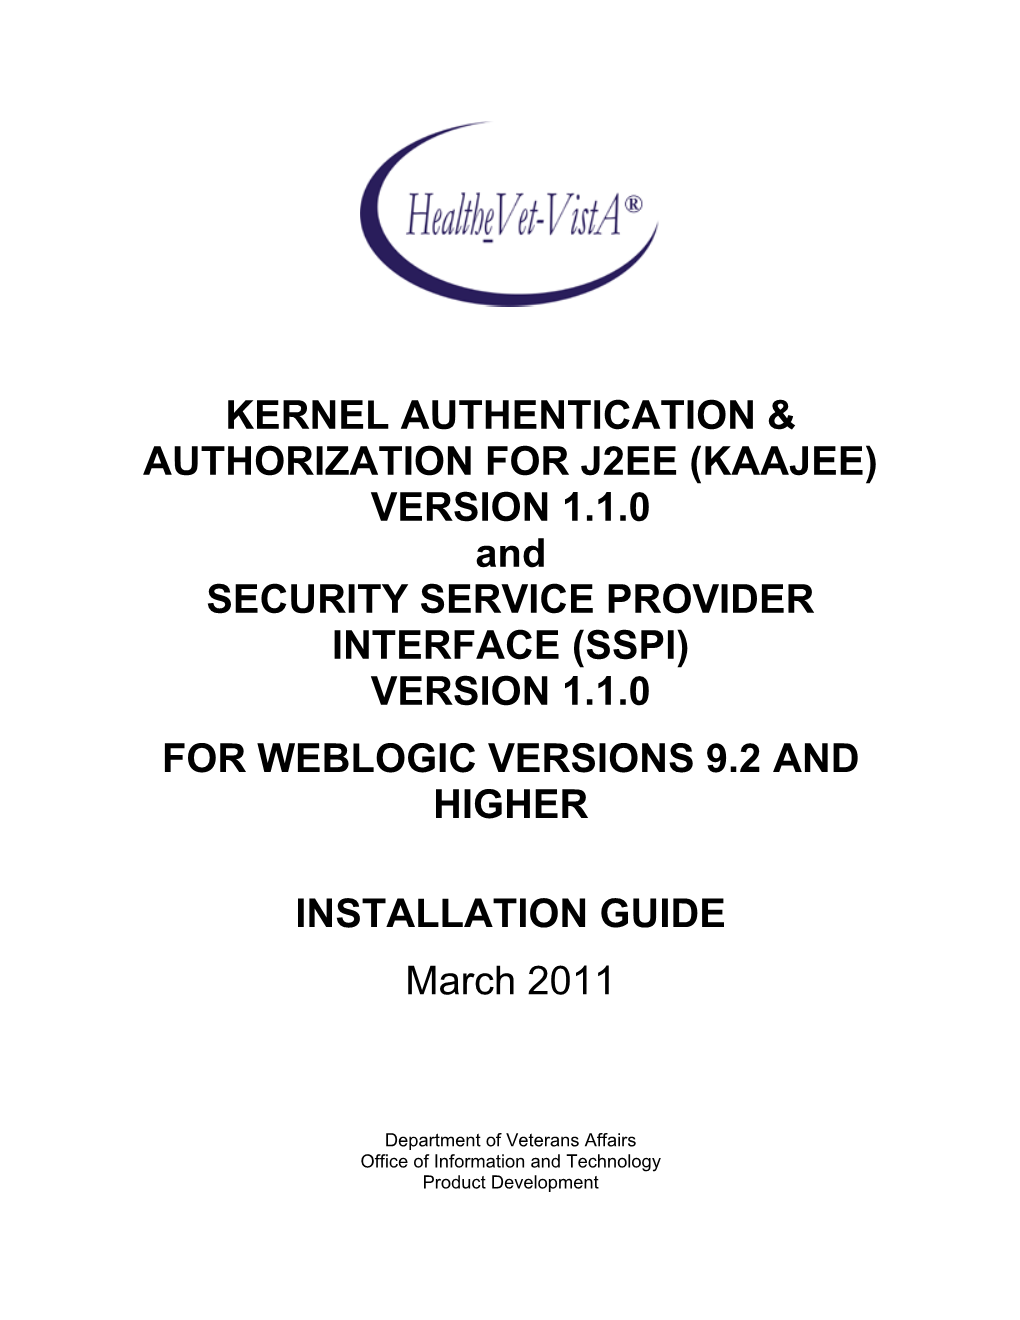 Kernel Authentication & Authorization for J2EE (KAAJEE) Installation Guide